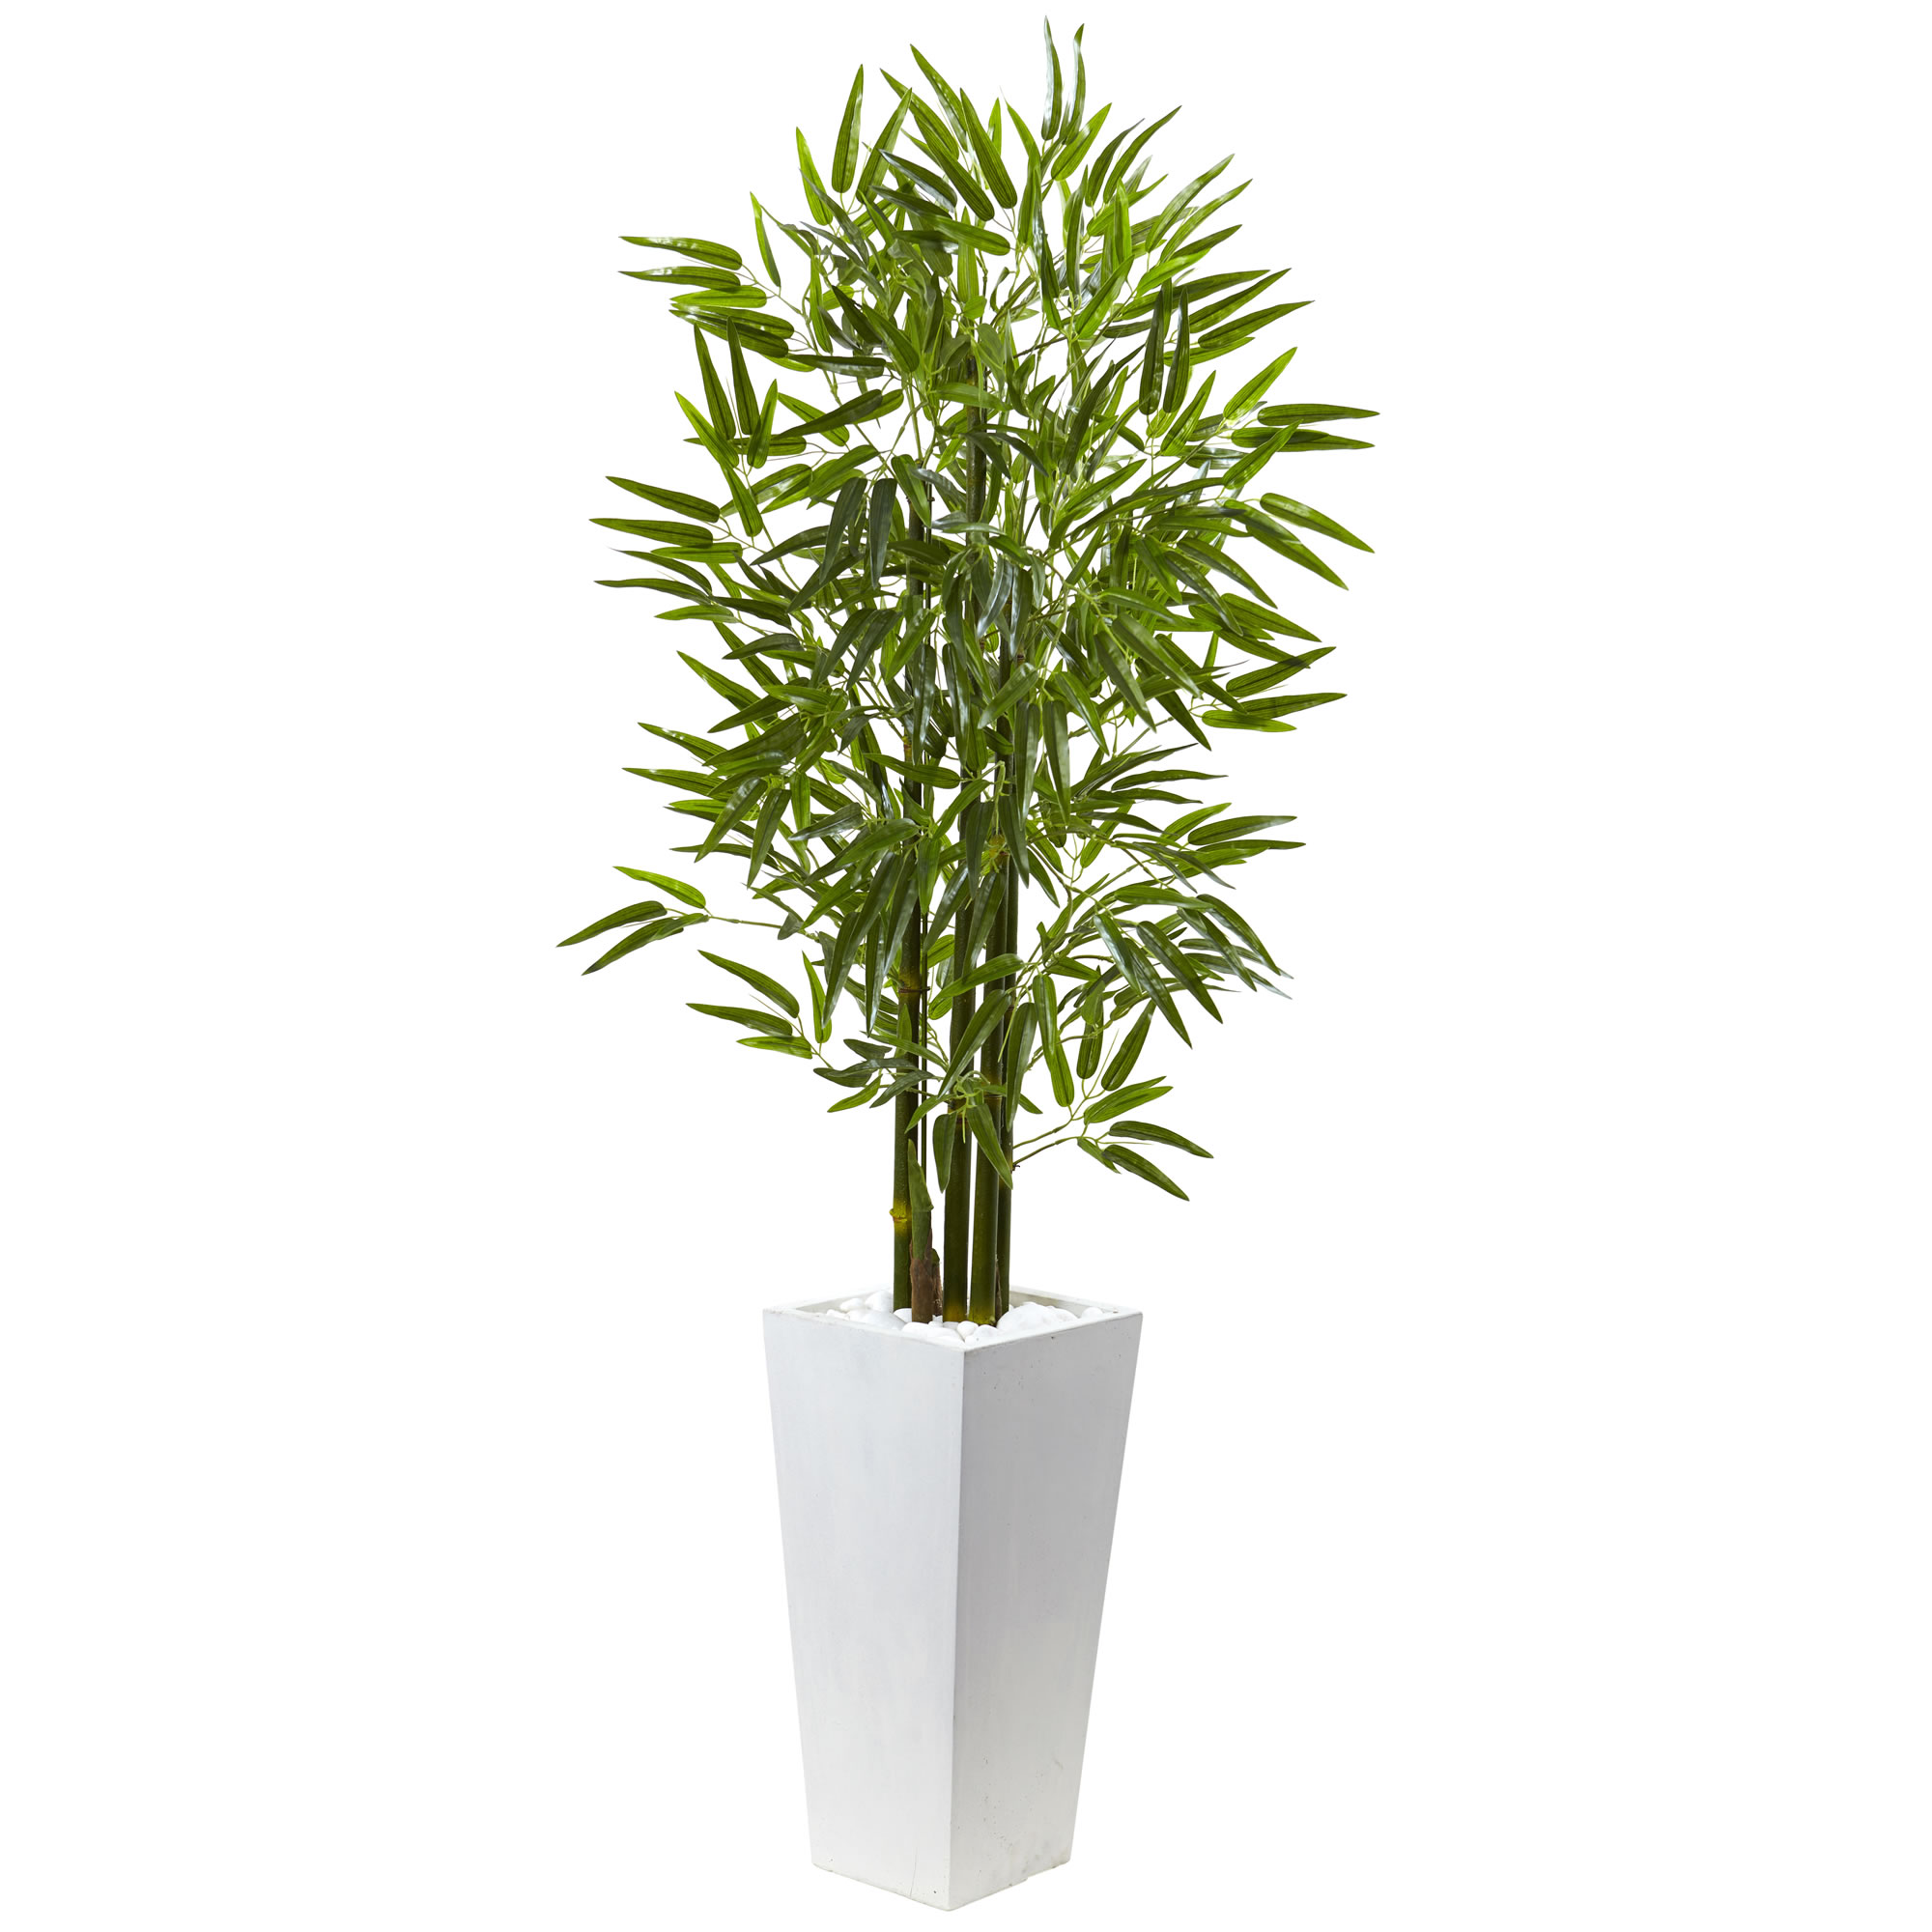 5 foot Bamboo Tree in White Planter: Limited UV Protection